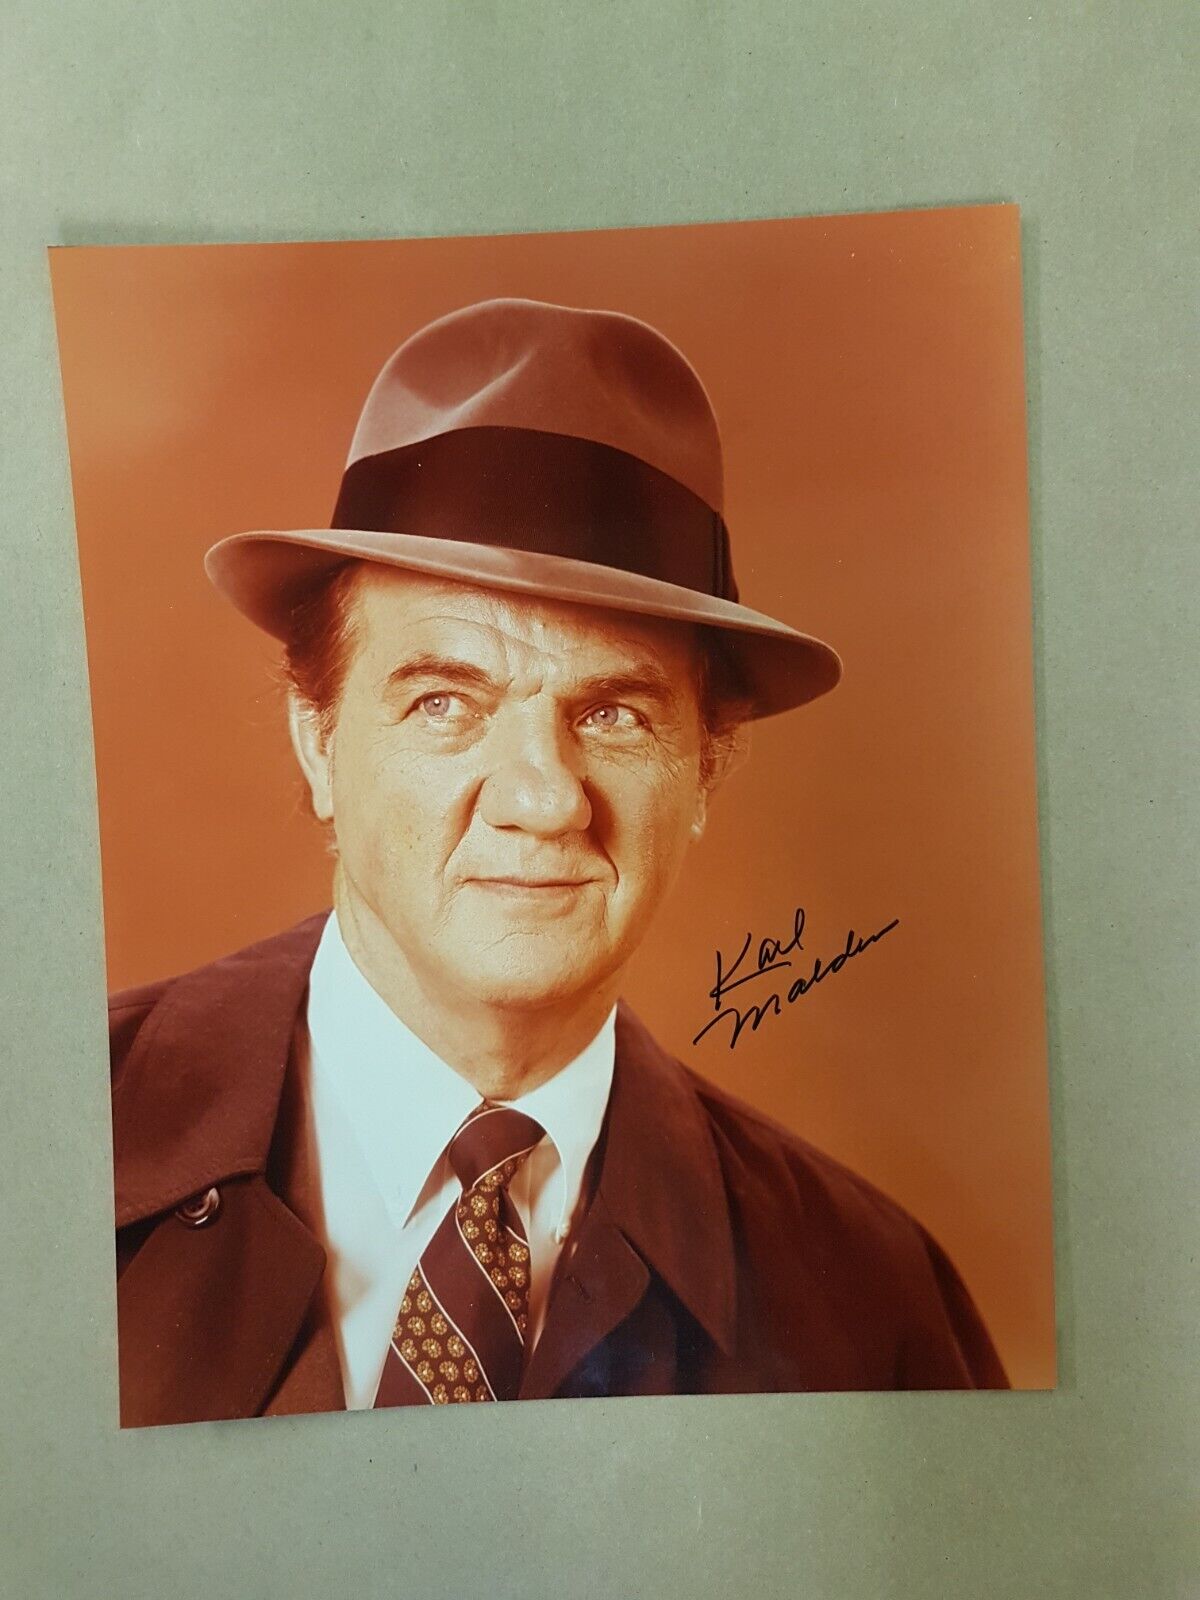 Karl Malden Streets of San Francisco Autograph Photo 8x10 TV Actor Signed star